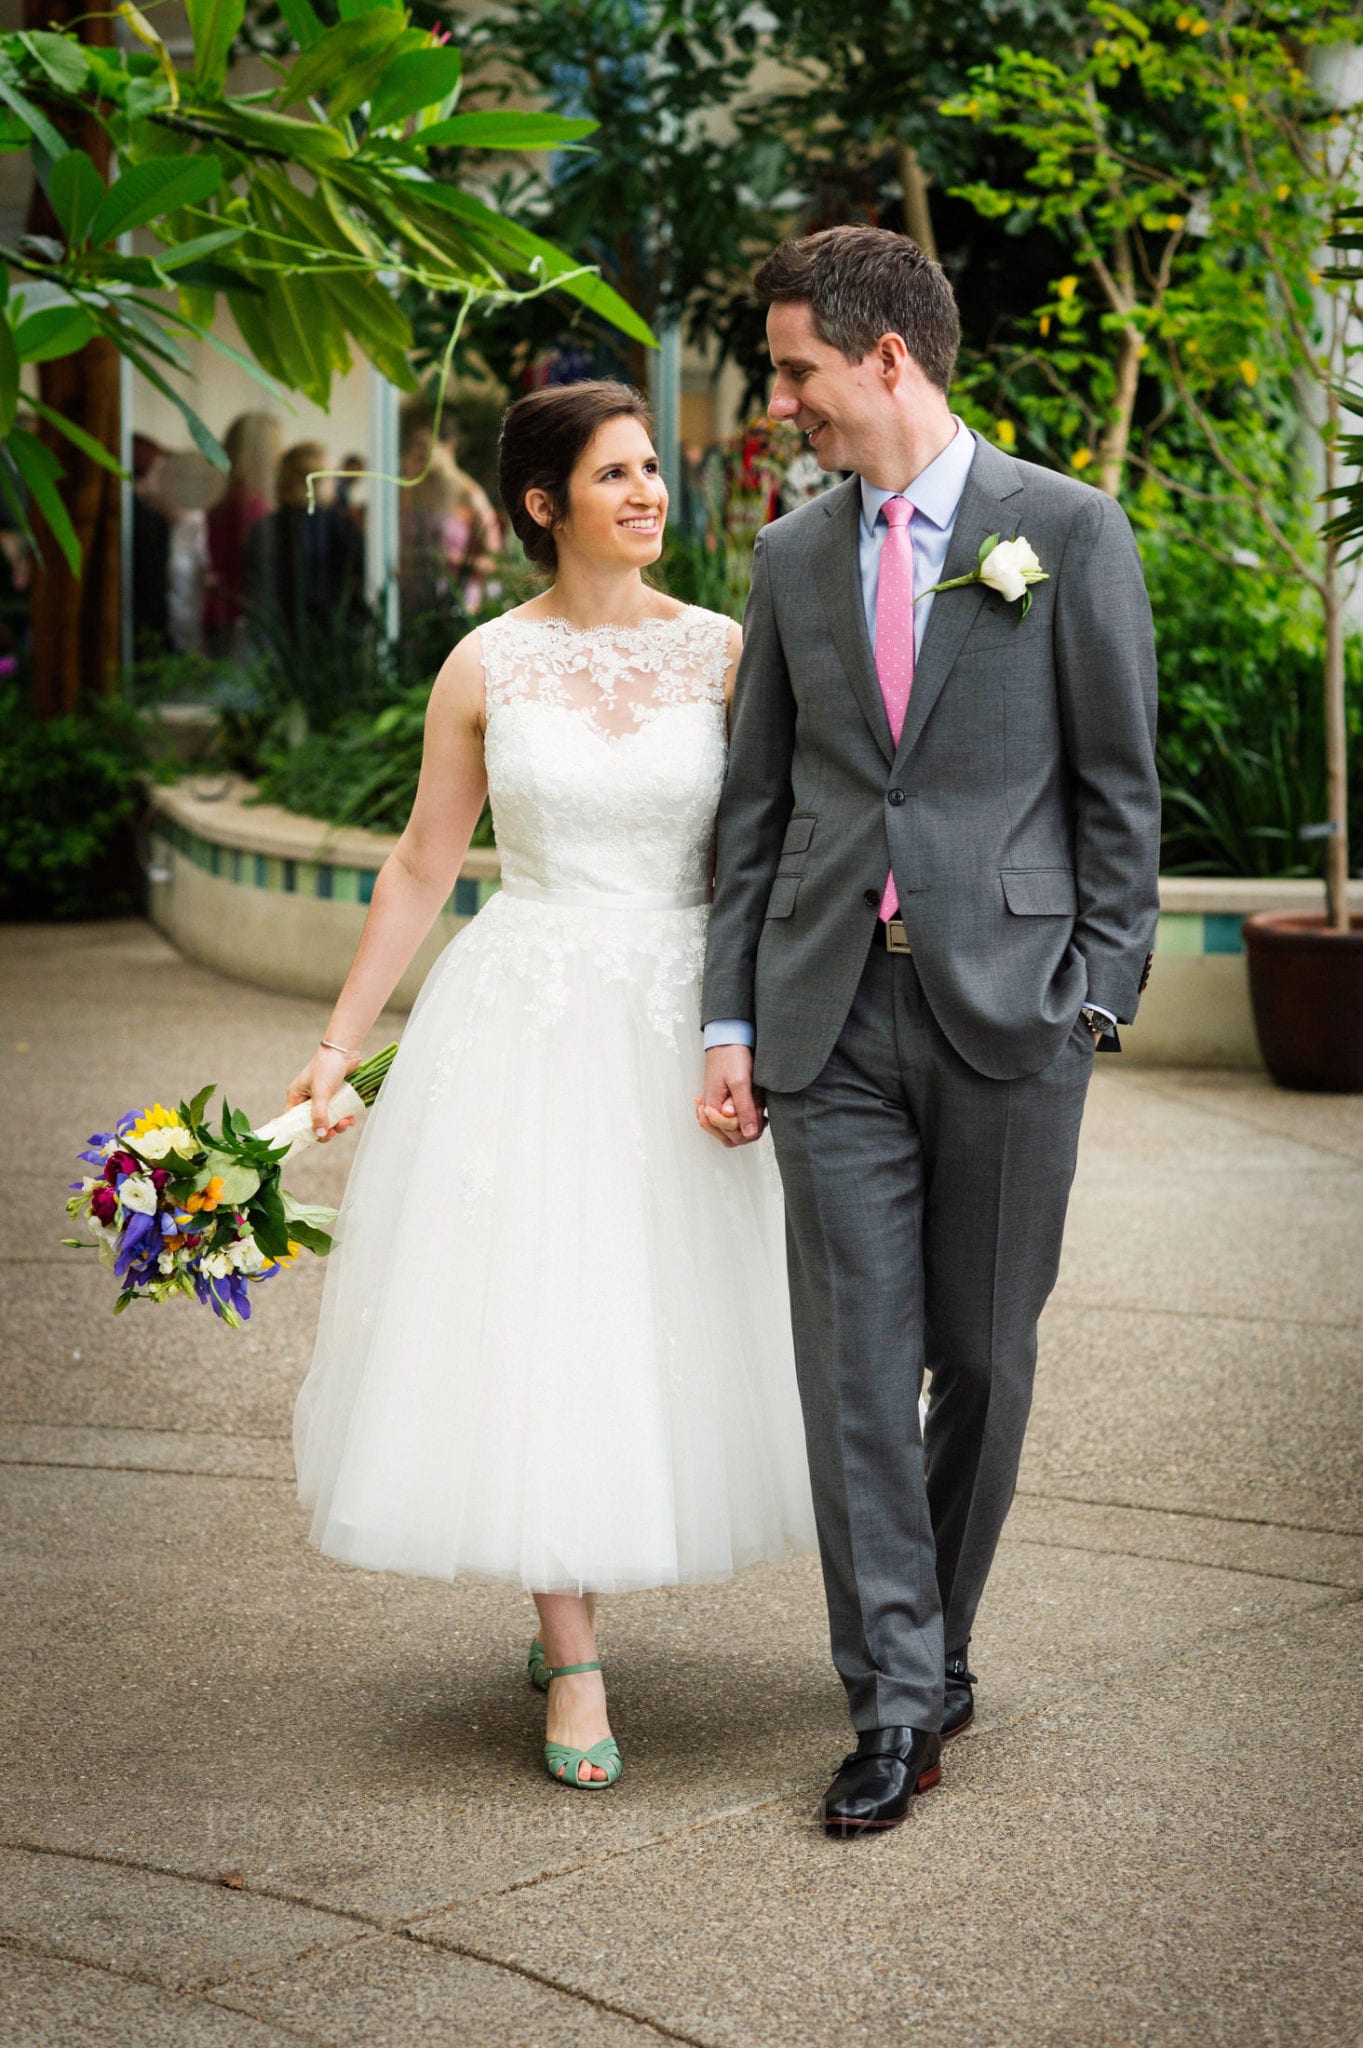 a bride with a colorful bouquet walks through a garden with her groom Phipps Conservatory Weddings